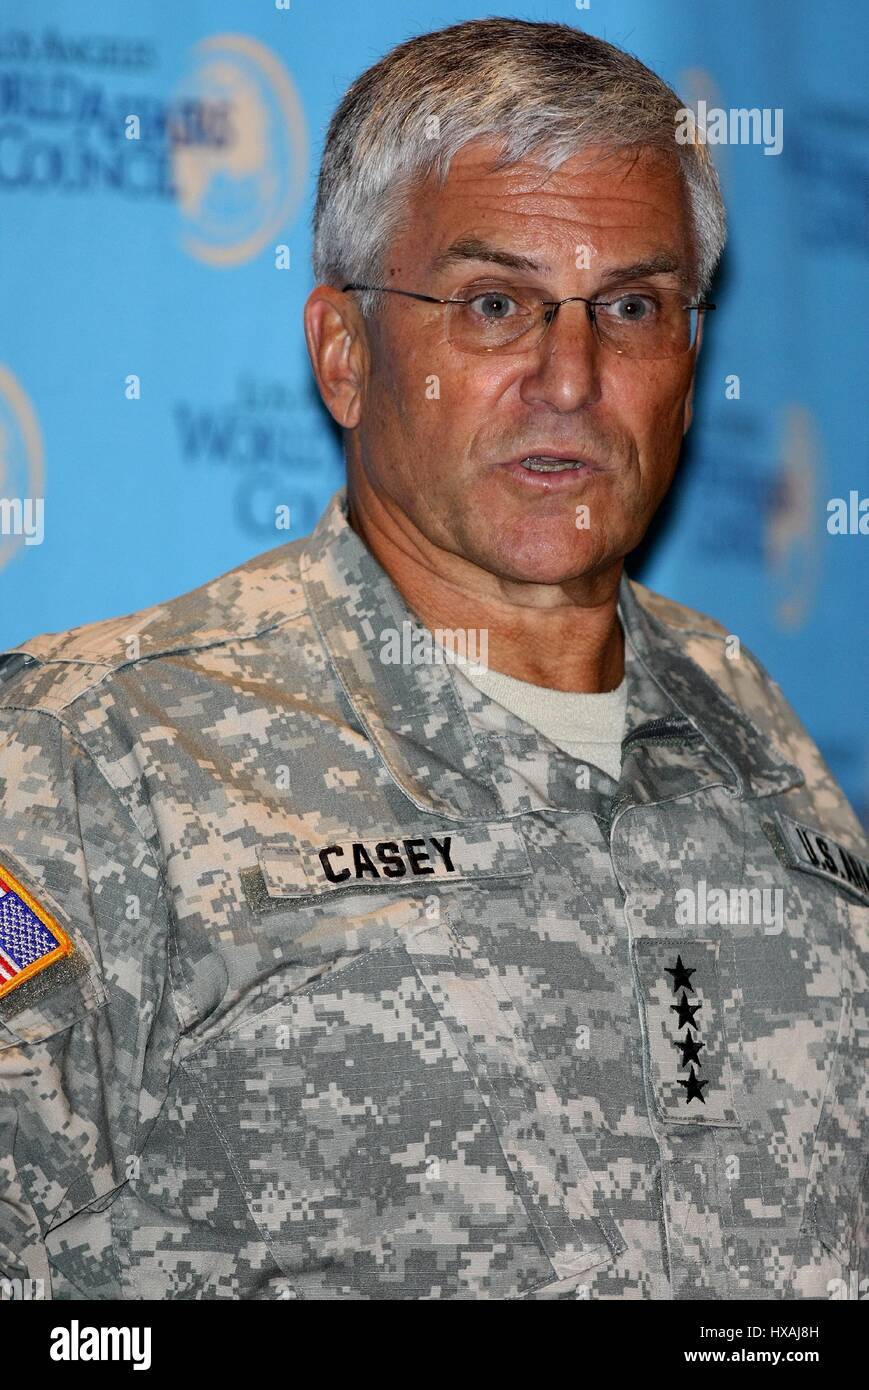 GENERAL GEORGE W. CASEY & JR CHIEF OF STAFF THE U.S. ARMY 27 September 2007 DOWNTOWN LOS ANGELES USA Stock Photo